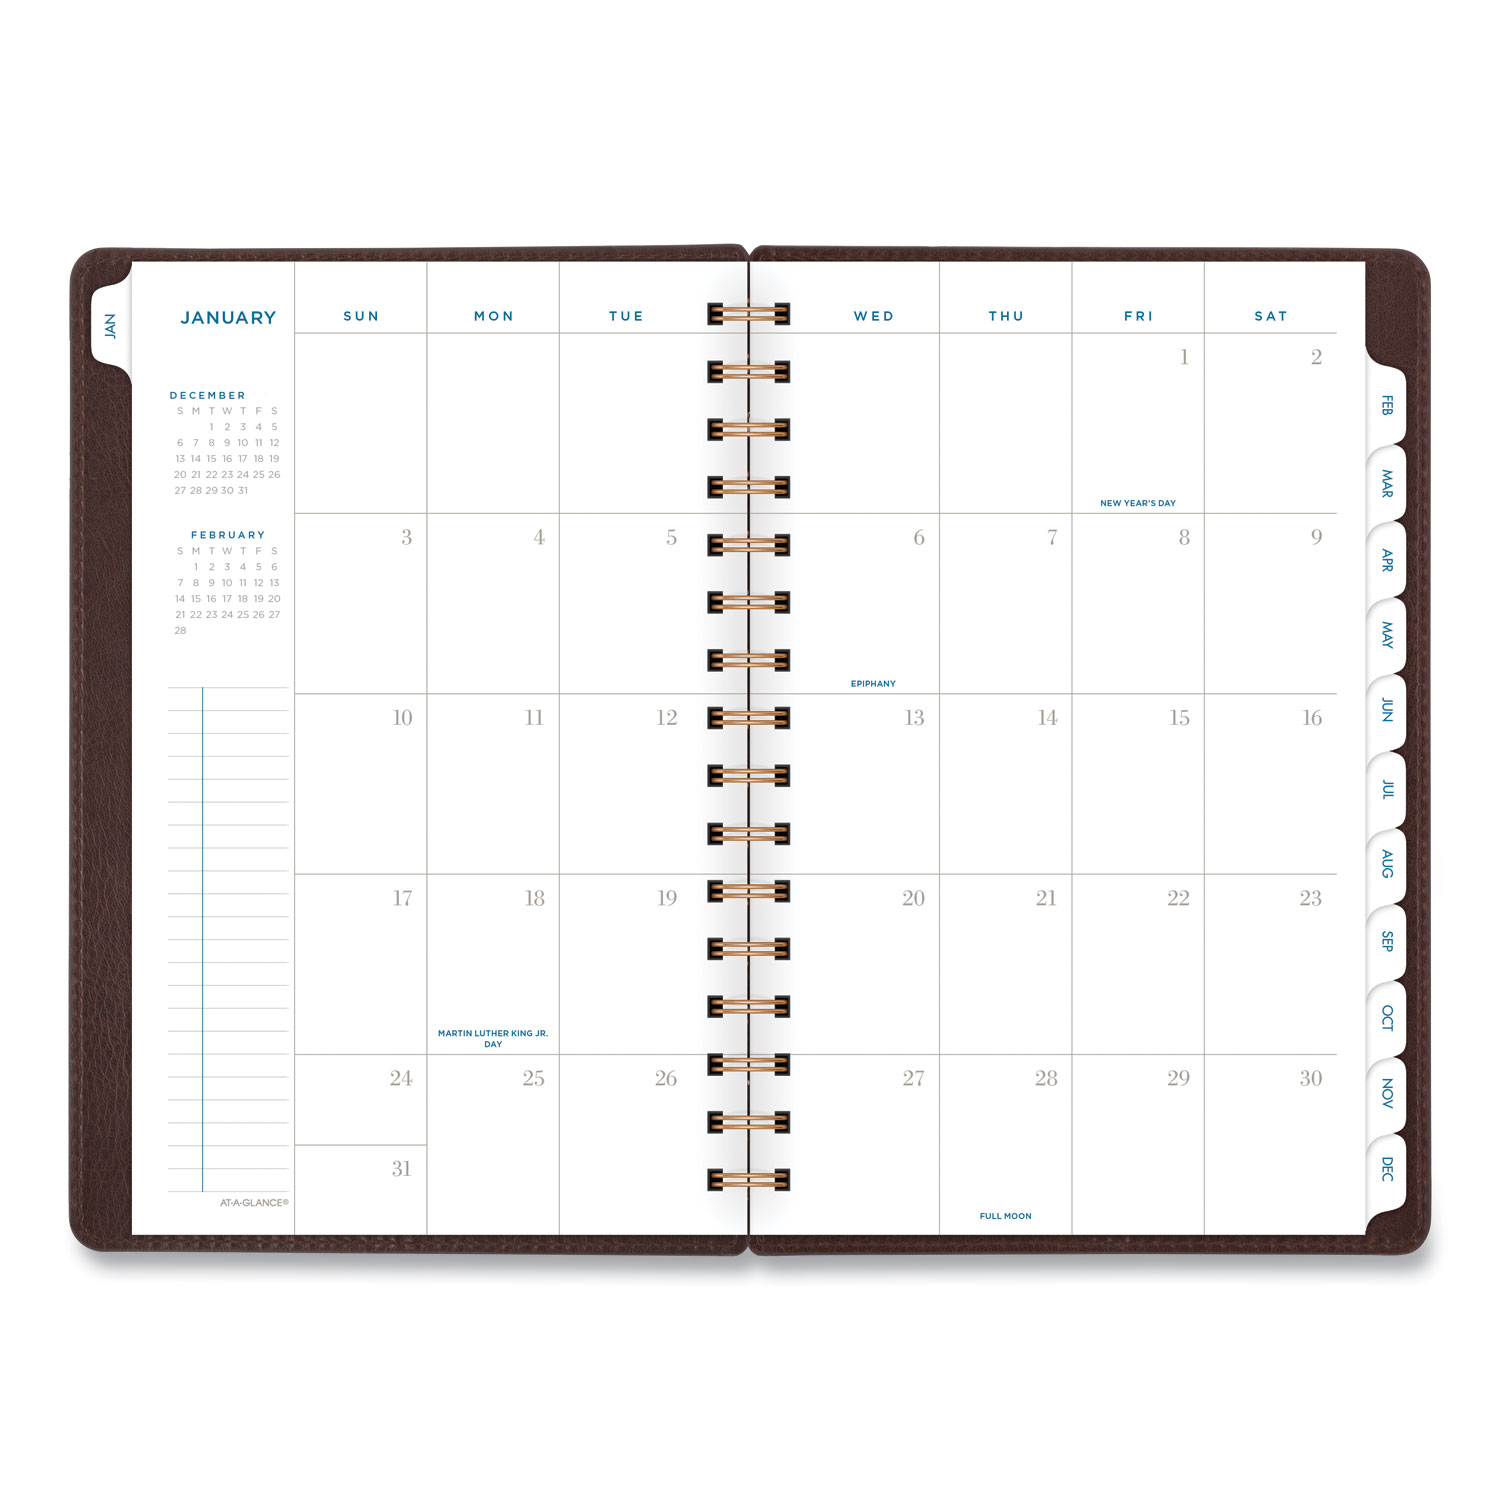 At-A-Glance 2023 Monthly Planner - Printable Template Calendar